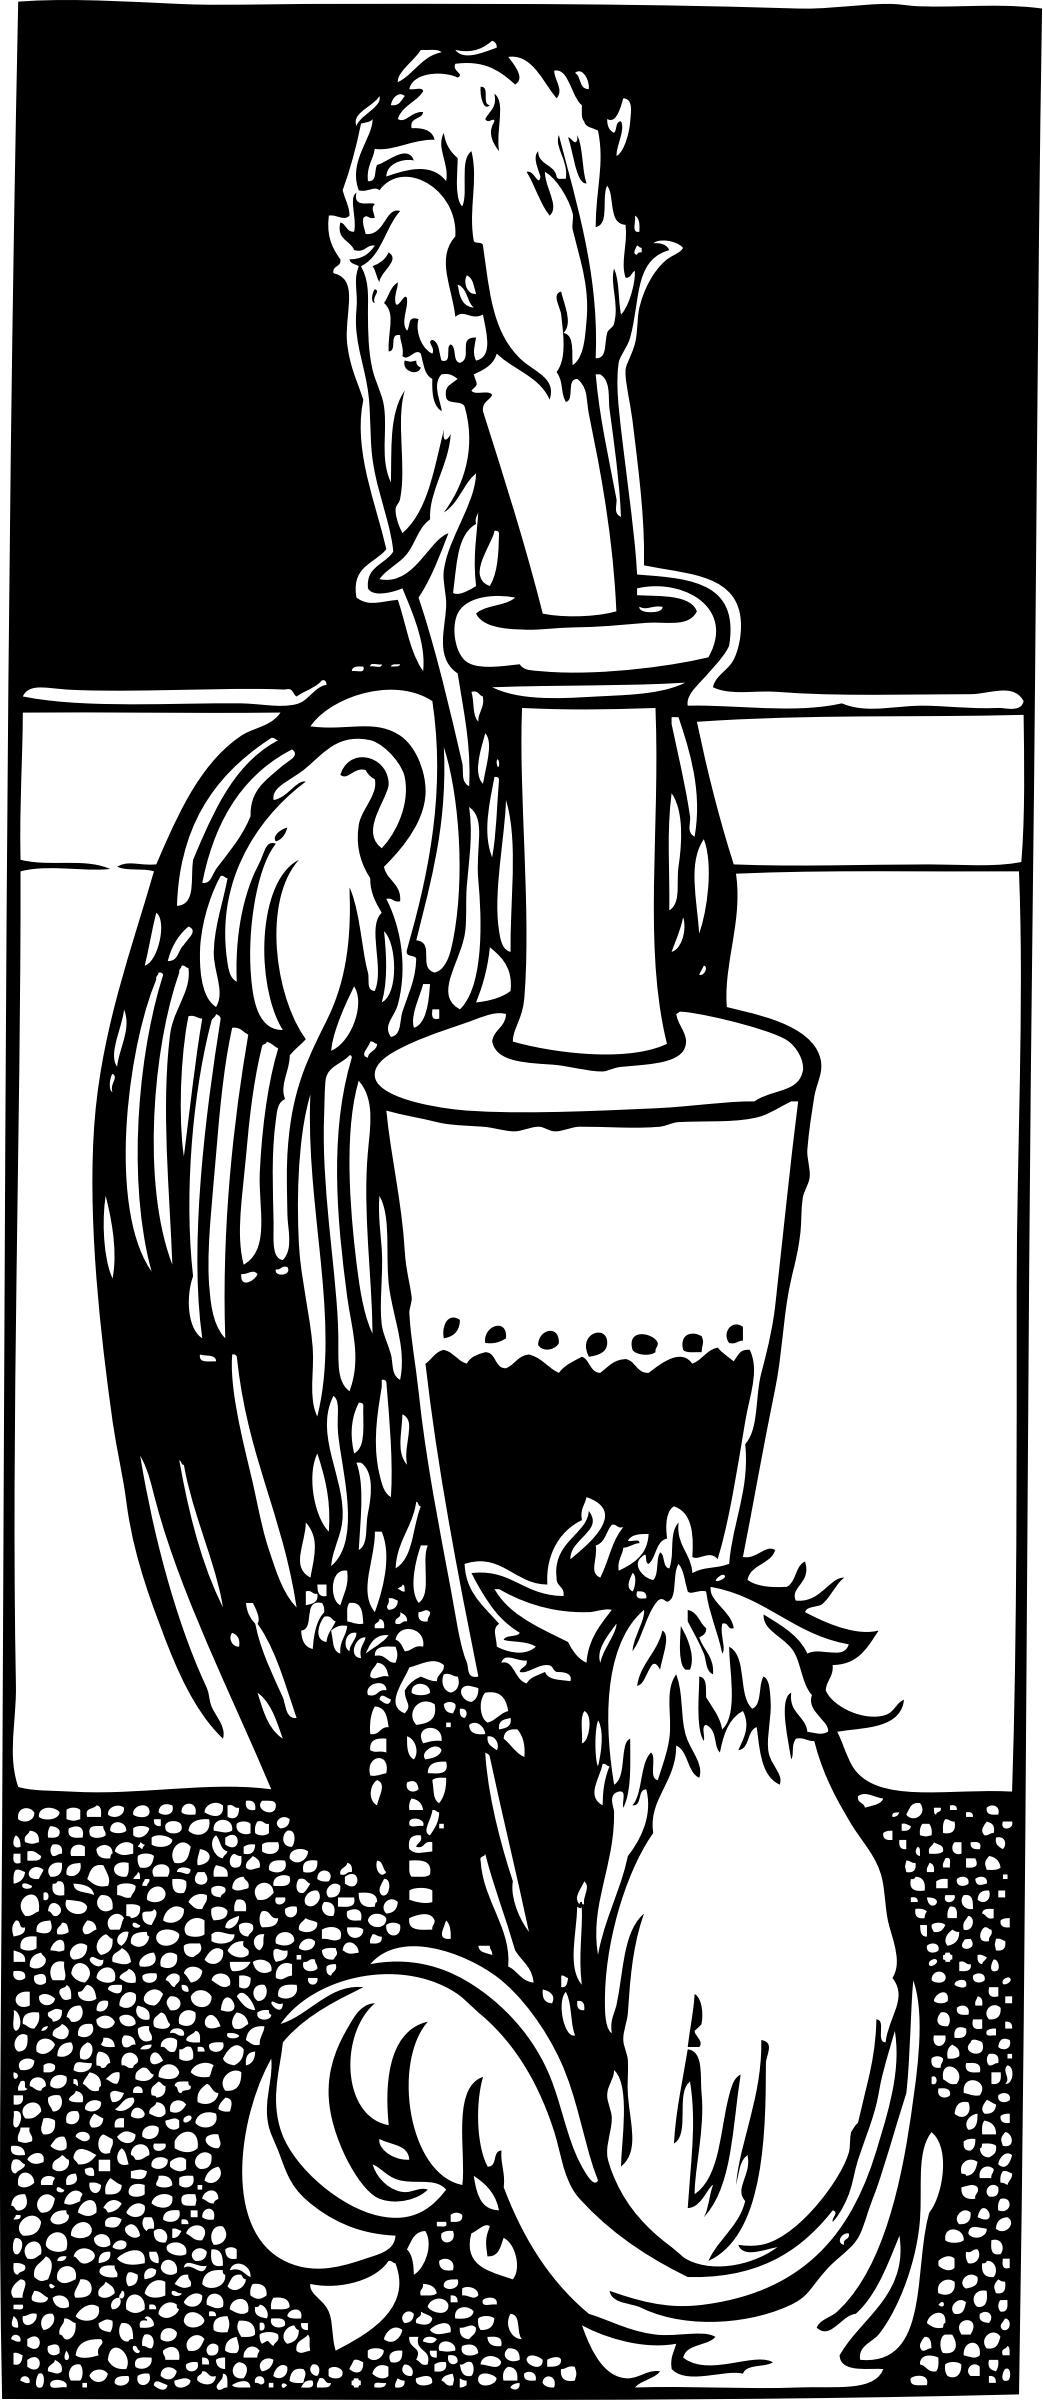 stork gets in urn fox cannot png transparent